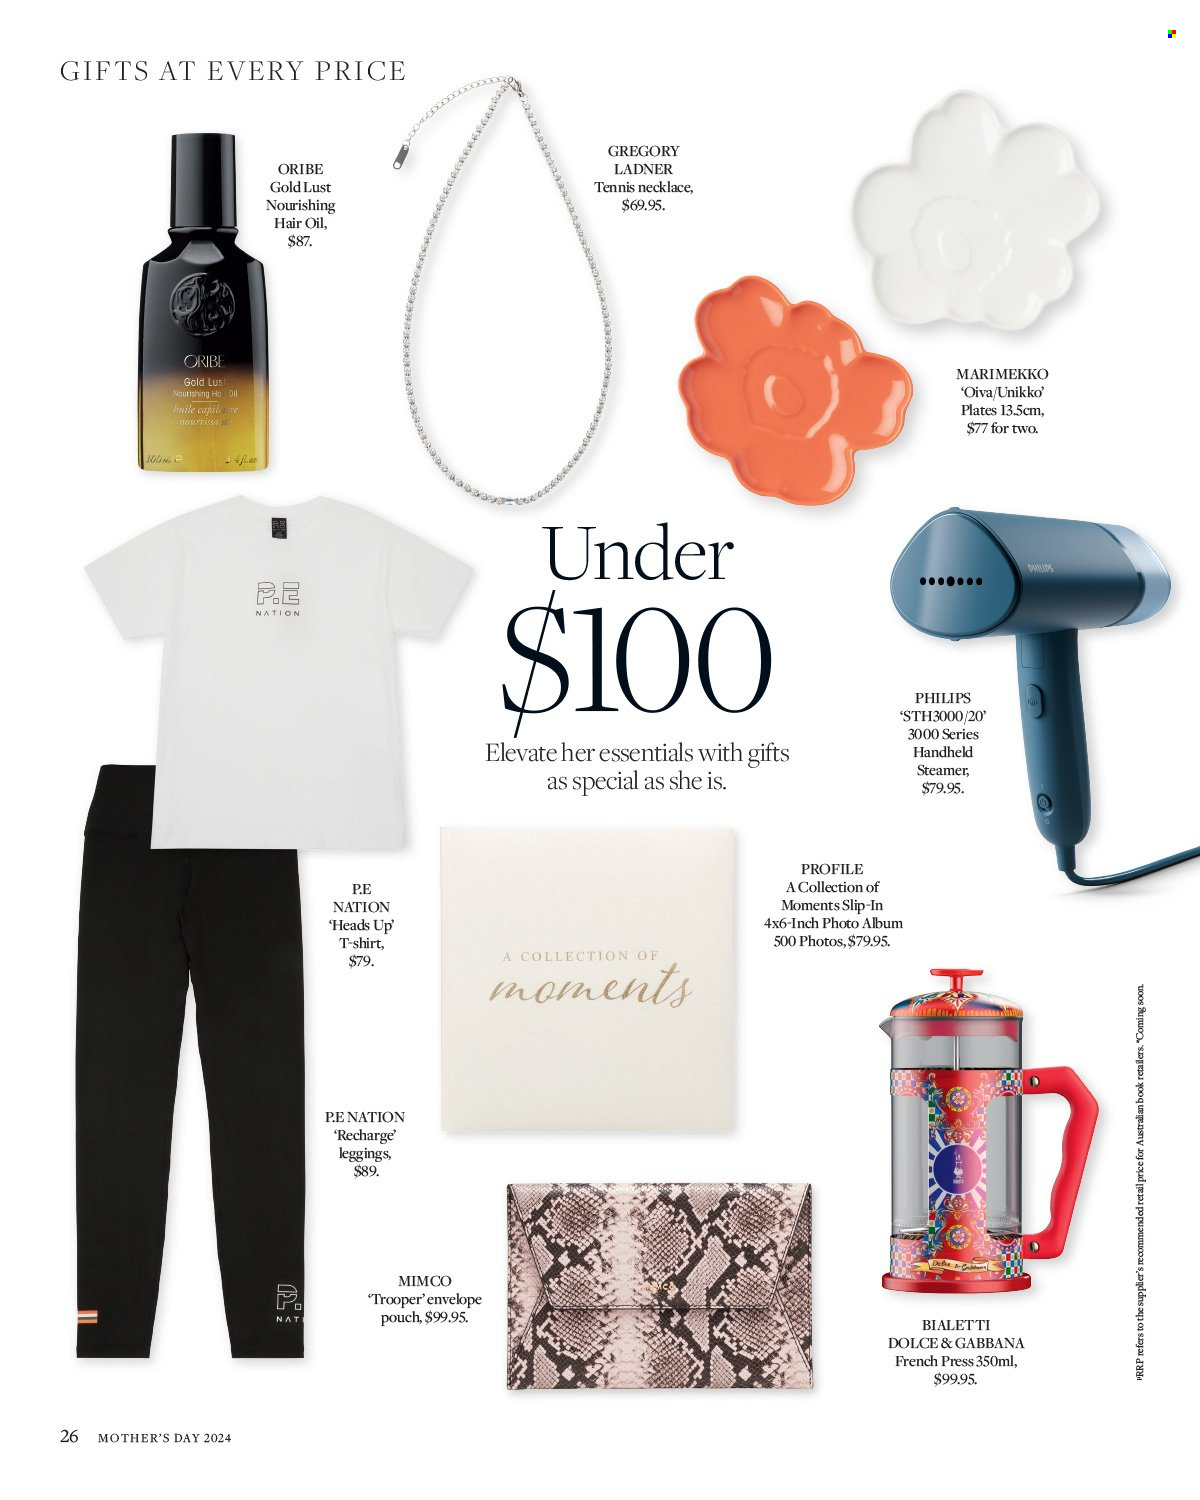 thumbnail - David Jones Catalogue - Sales products - Dolce & Gabbana, Philips, oil, hair oil, plate, envelope, book, French press, vertical steamer, t-shirt, leggings, necklace. Page 26.